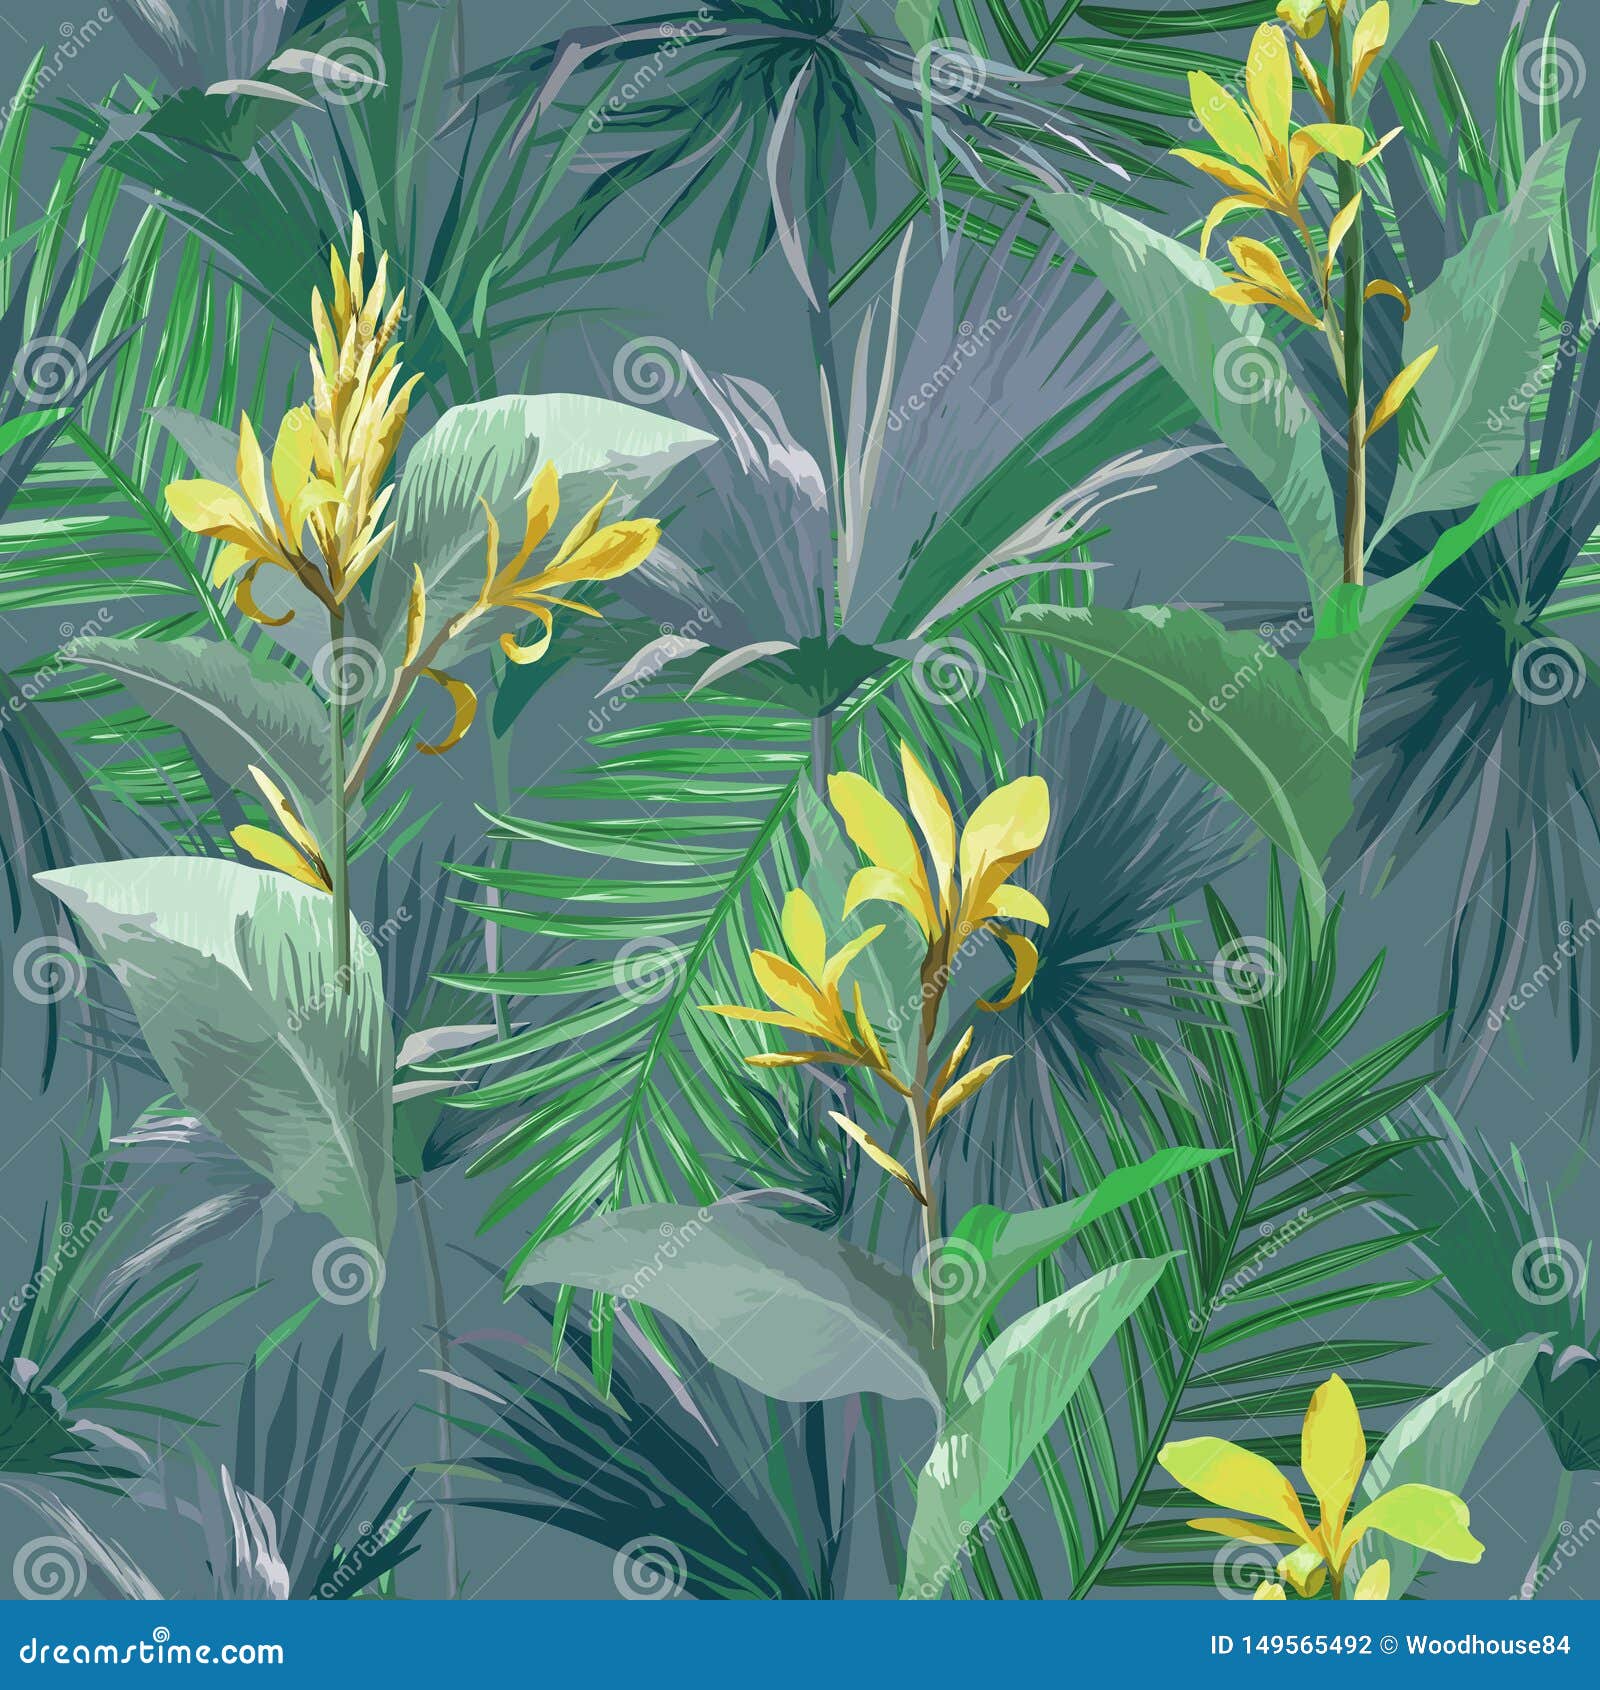 Tropical Palm Leaves And Flowers, Jungle Leaves Seamless ...